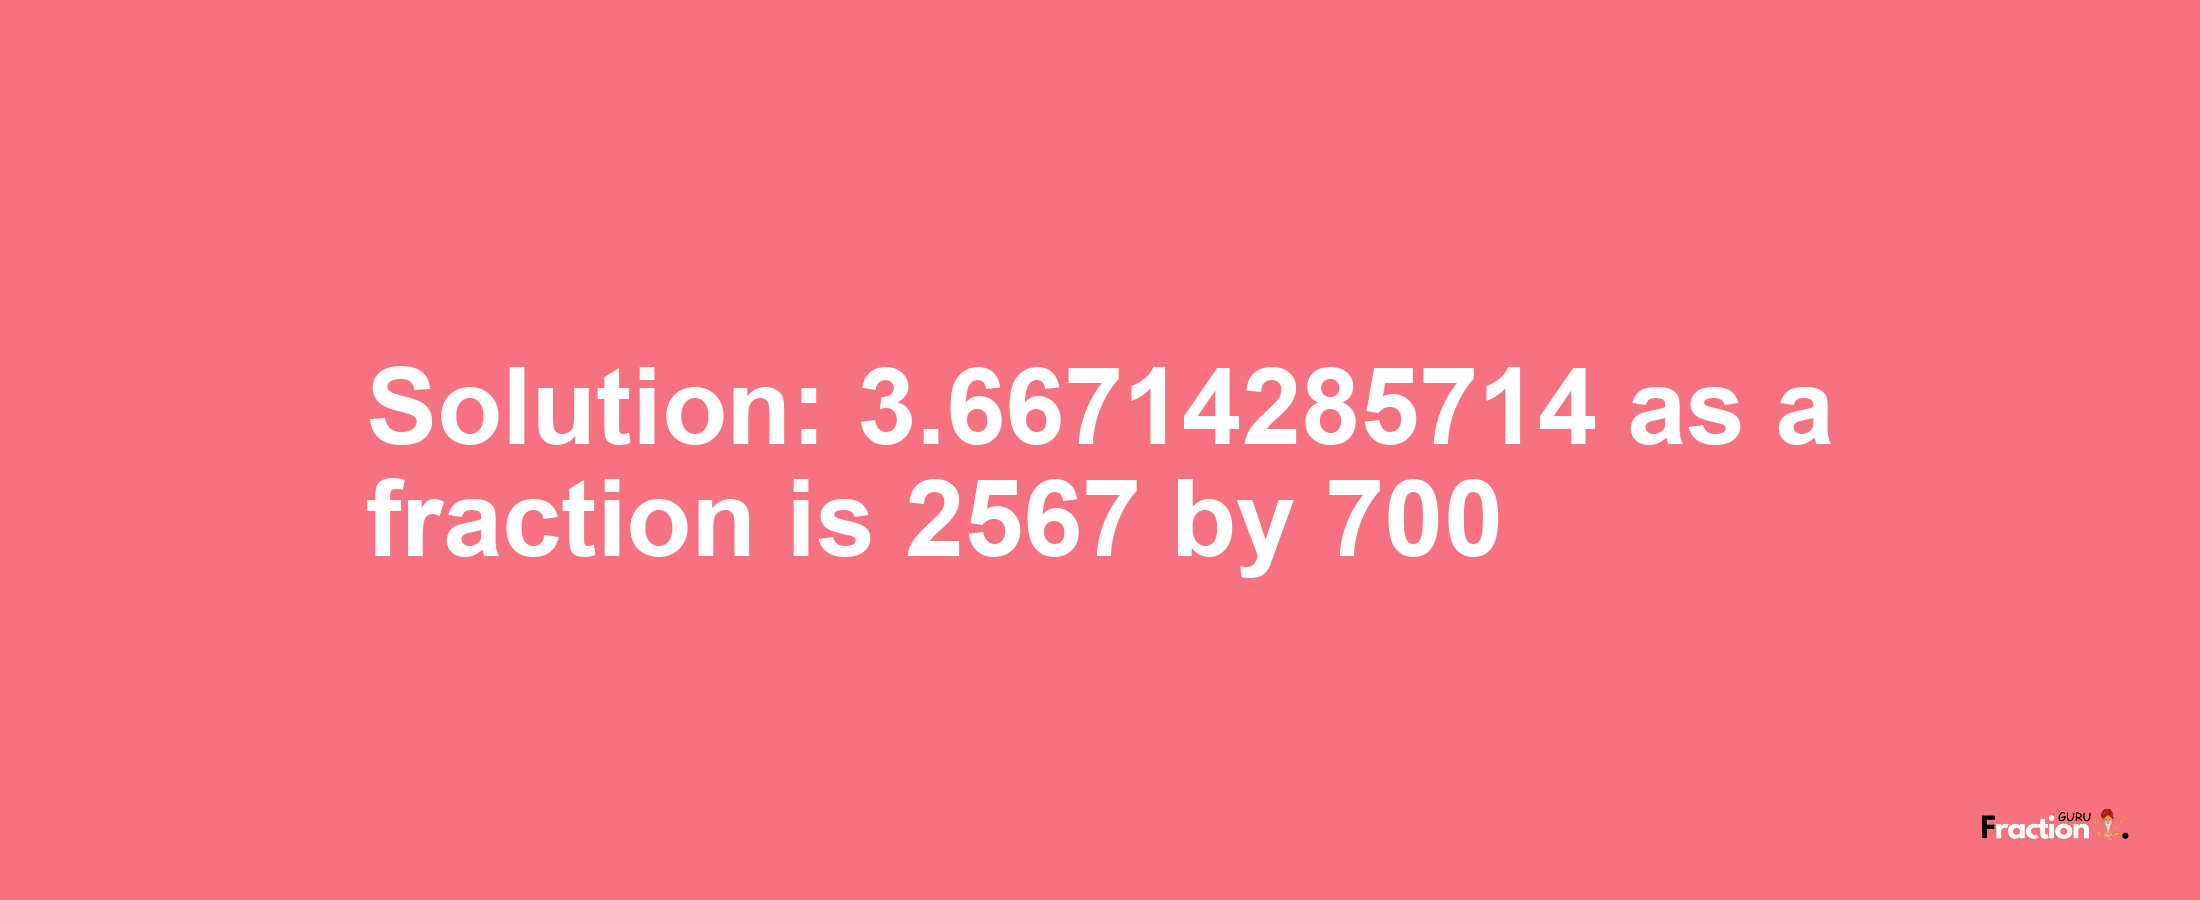 Solution:3.66714285714 as a fraction is 2567/700